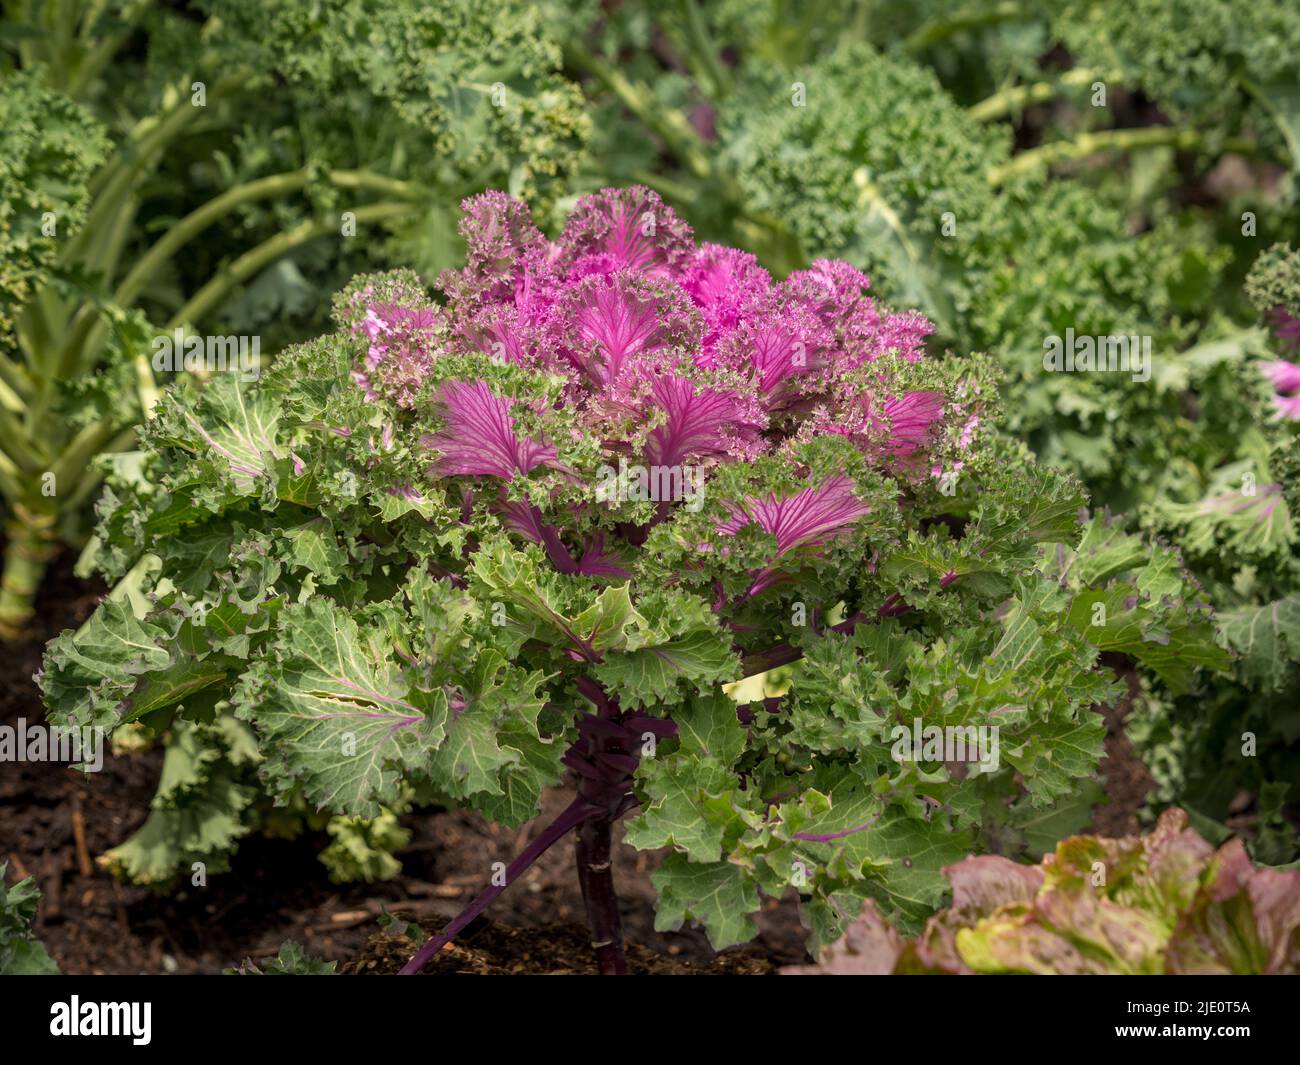 Pink and green edible ornamental cabbage called Kale Rainbow Candy Crush, growing in a UK garden. Stock Photo